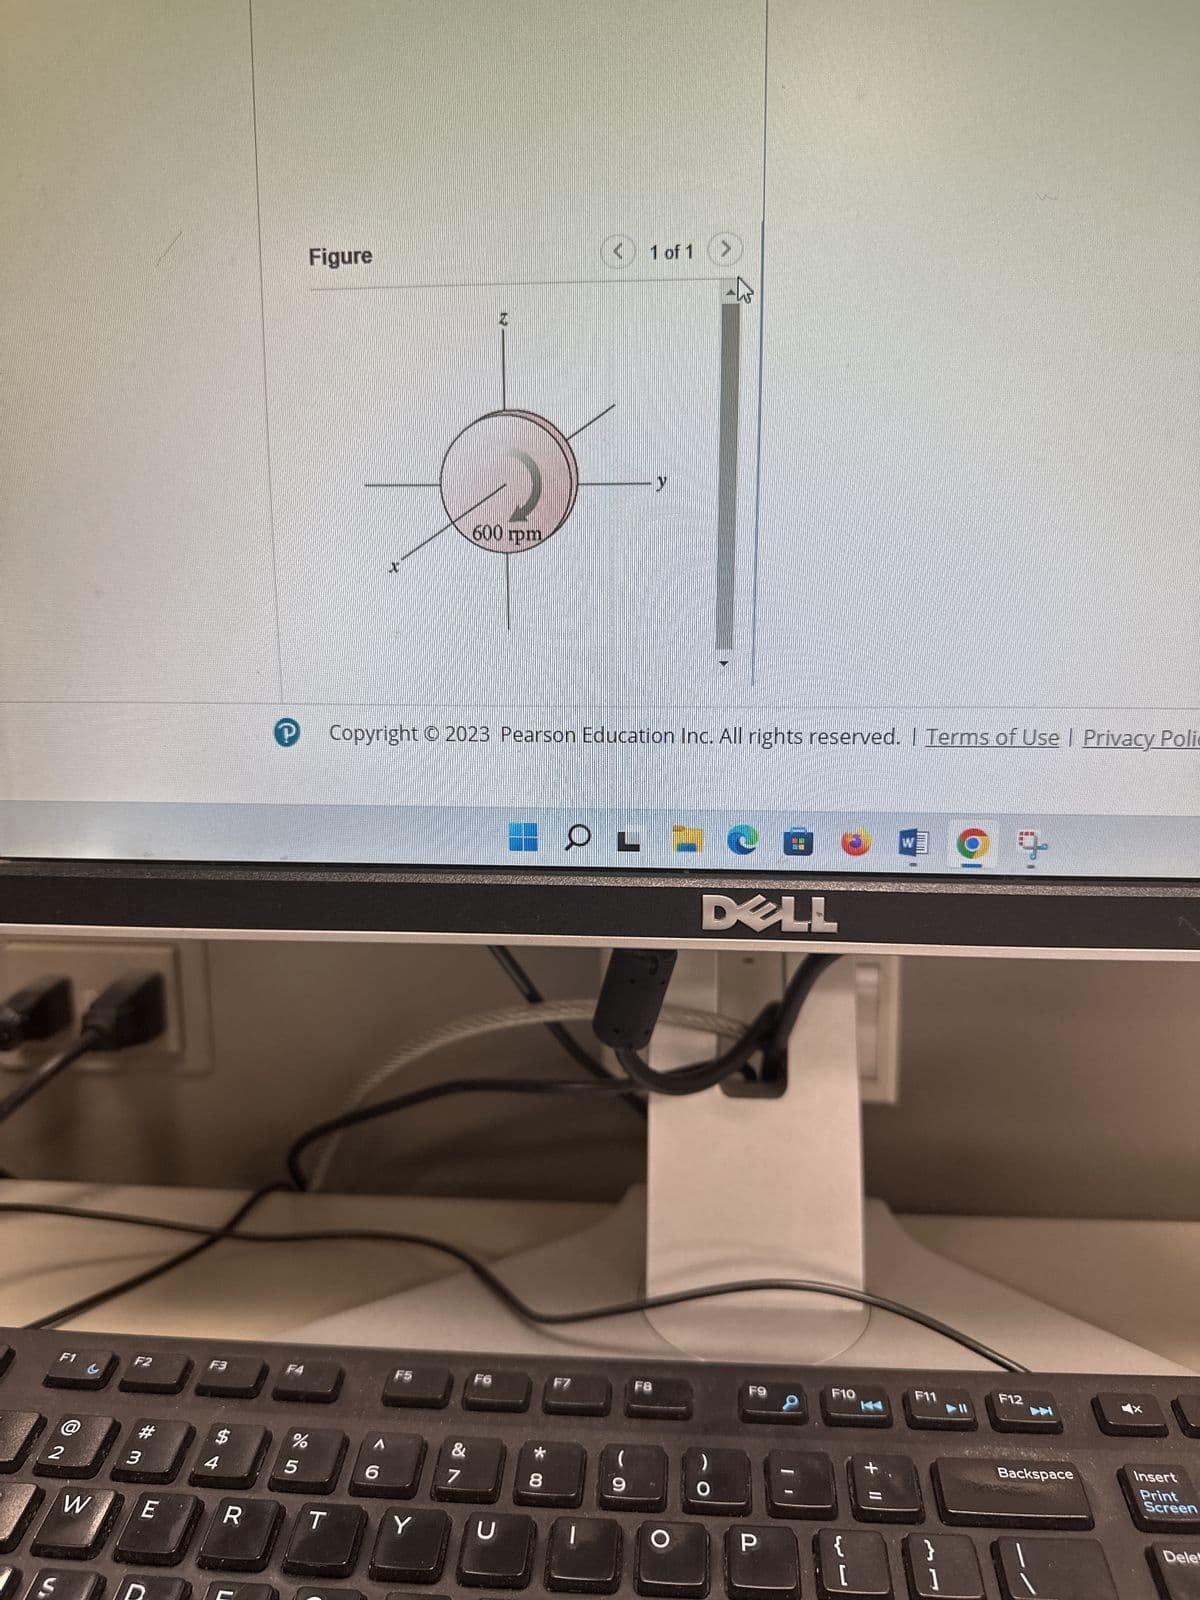 of a rigid body
12.43 - Enhanced - with Feedback
want to review (Pages 321 - 323)
HO
2
▼
L-CO
Part A
DELL
VE ΑΣΦ
0.03
rotating disk in the figure (Figure 1)?
What is the magnitude of the angular momentum of the 2.70 kg, 4.20-cm-diameter
Express your answer in kilogram meters squared per second.
Submit Previous Answers Request Answer
Part B
Provide Feedback
X Incorrect; Try Again; 4 attempts remaining
?
W
@ 9
<
M
kg - m²/s
? Help
10 of 16
Review | Constants
Next >
3:29 PM
11/26/2023
+
1